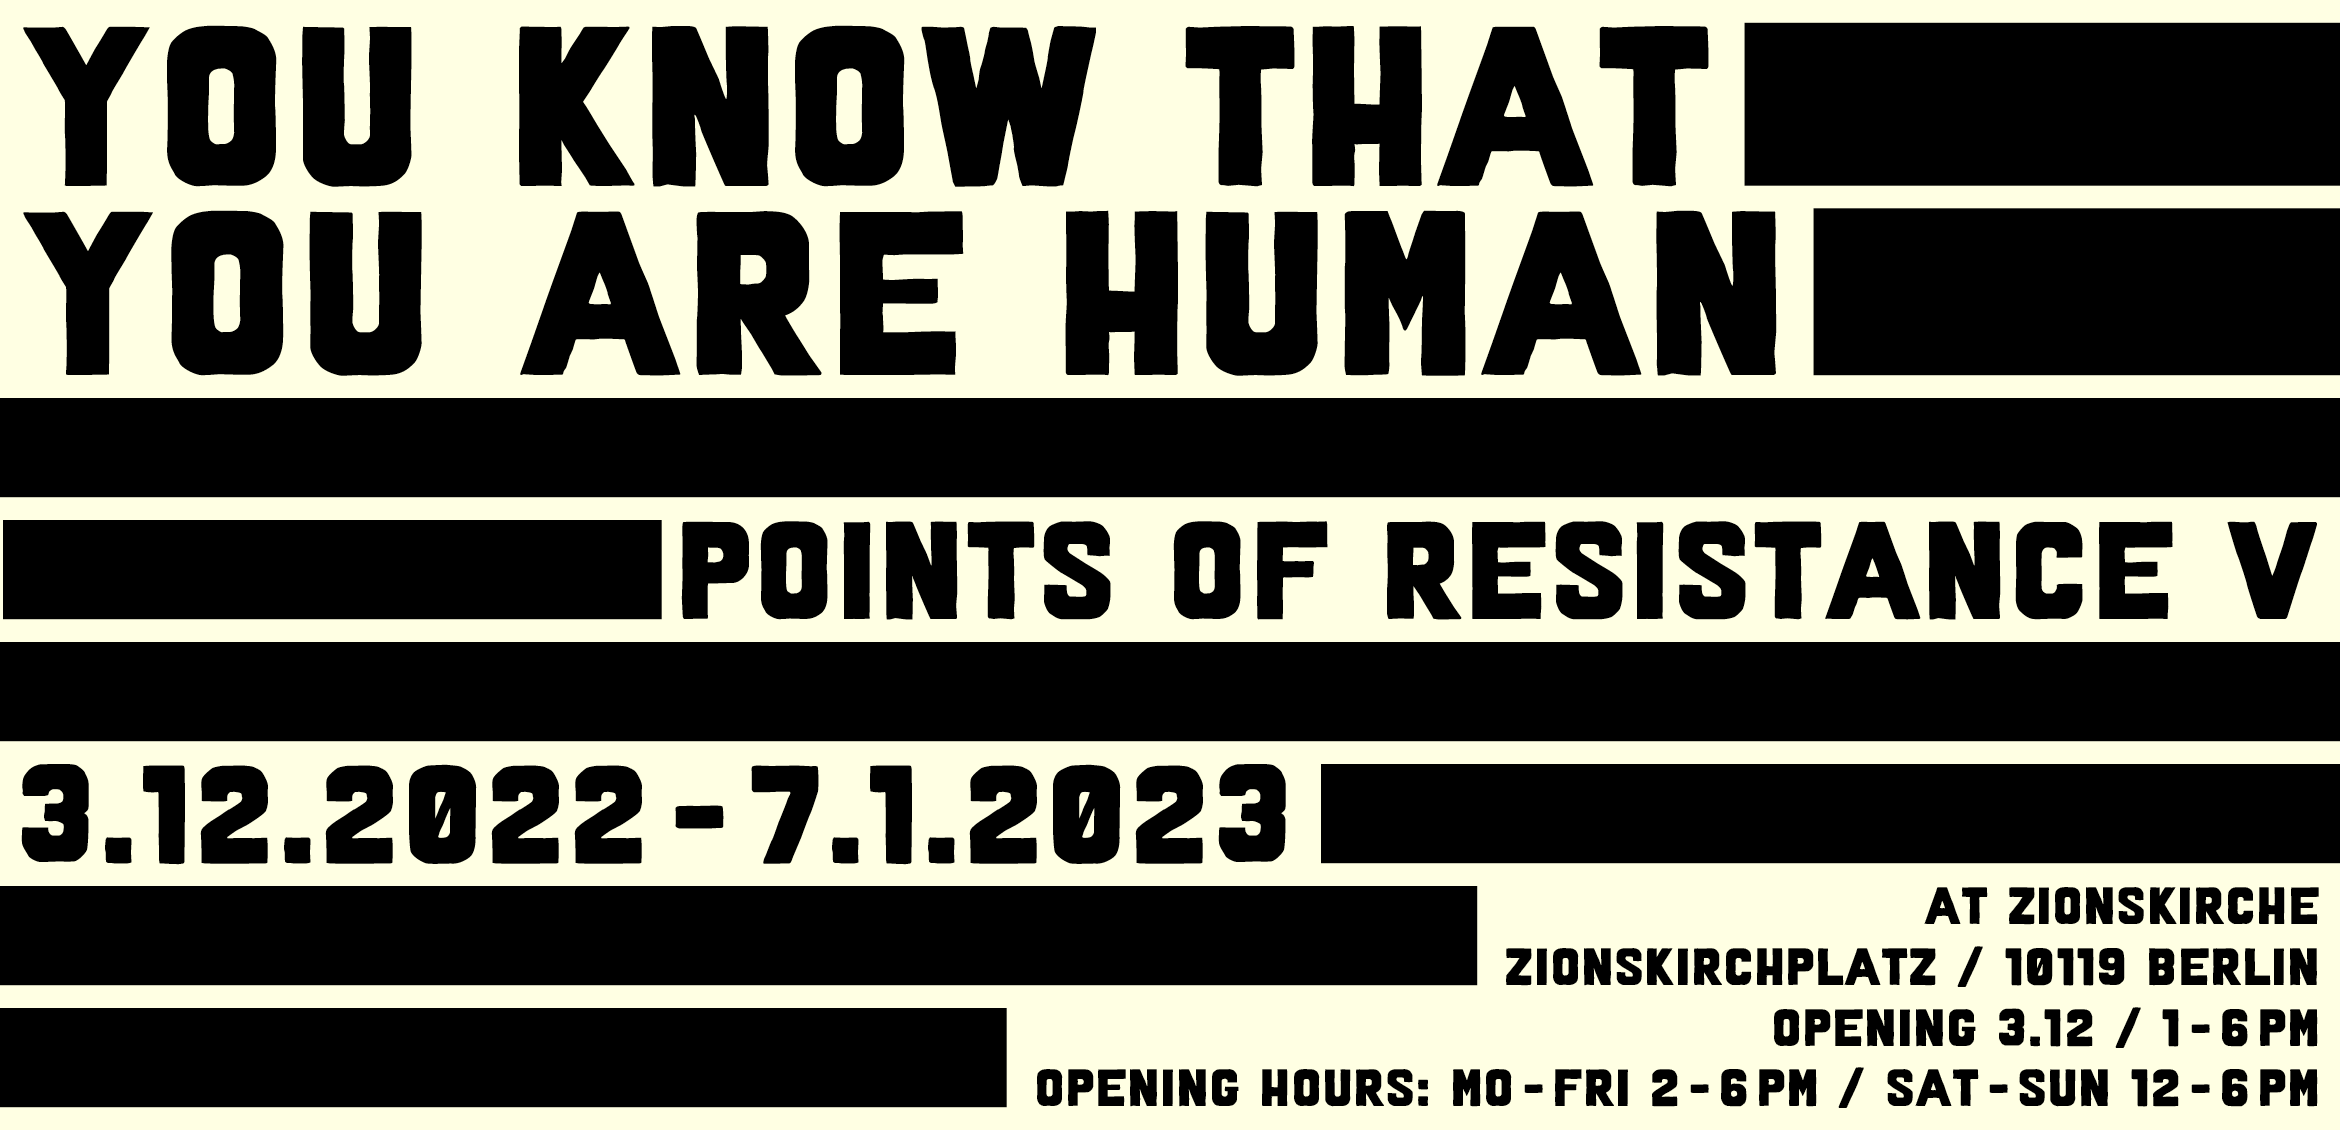 You Know That You Are Human @ POINTS of RESISTANCE V